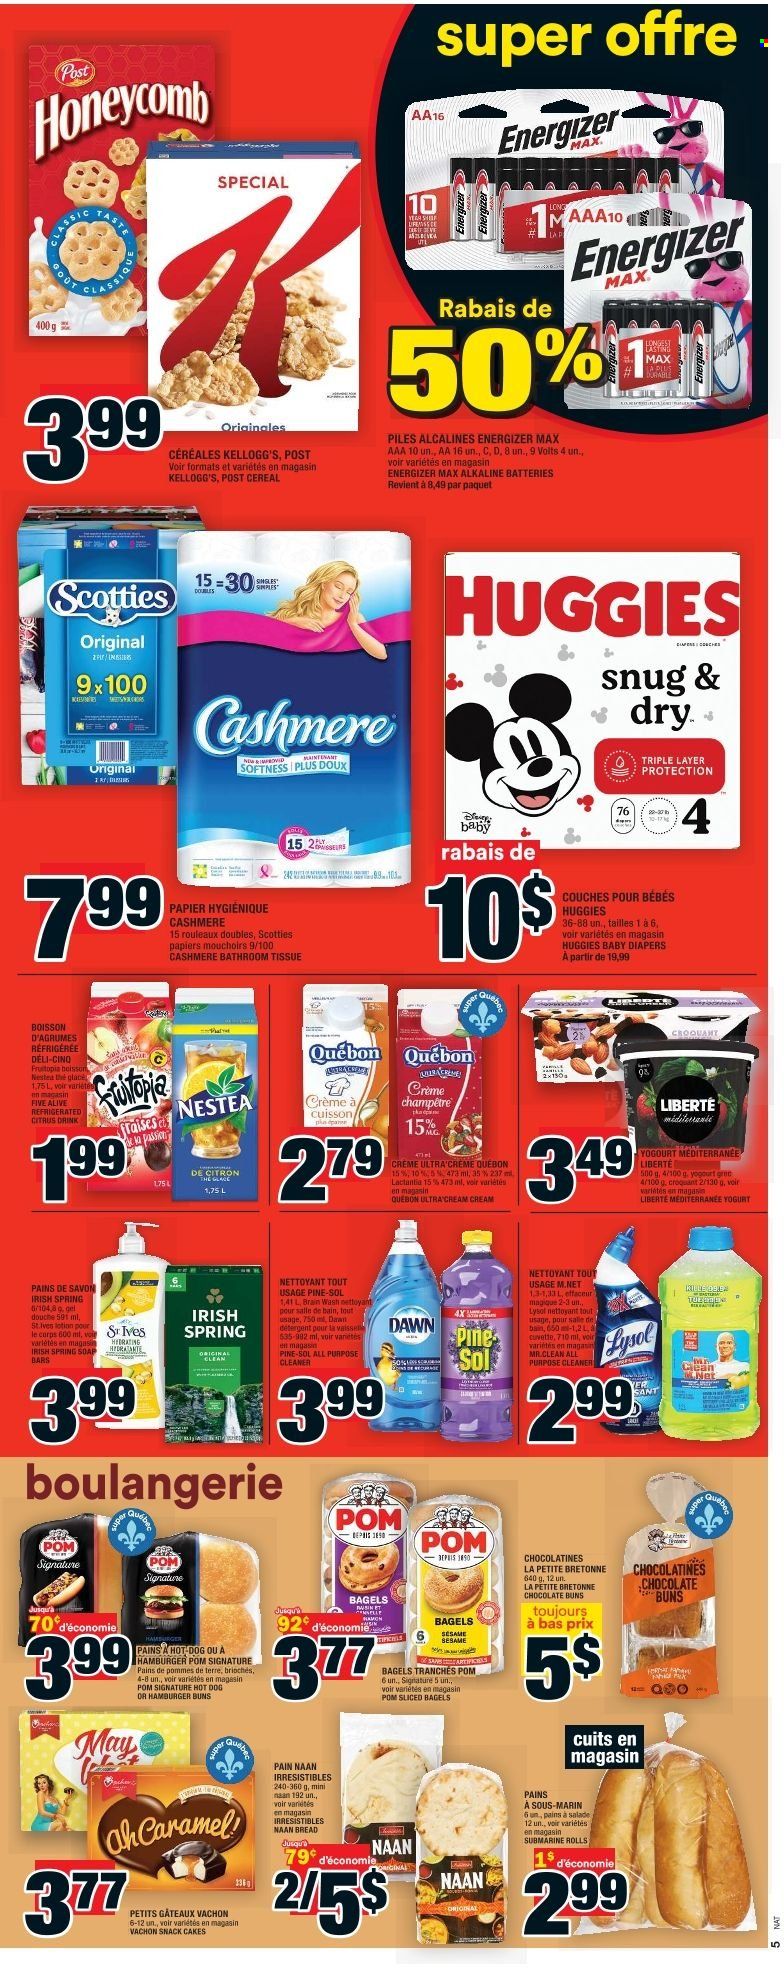 thumbnail - Super C Flyer - June 30, 2022 - July 06, 2022 - Sales products - bagels, bread, cake, buns, burger buns, hot dog, yoghurt, chocolate, snack, Kellogg's, cereals, nappies, bath tissue, cleaner, all purpose cleaner, Lysol, Pine-Sol, soap, body lotion, detergent, Energizer, Huggies. Page 7.